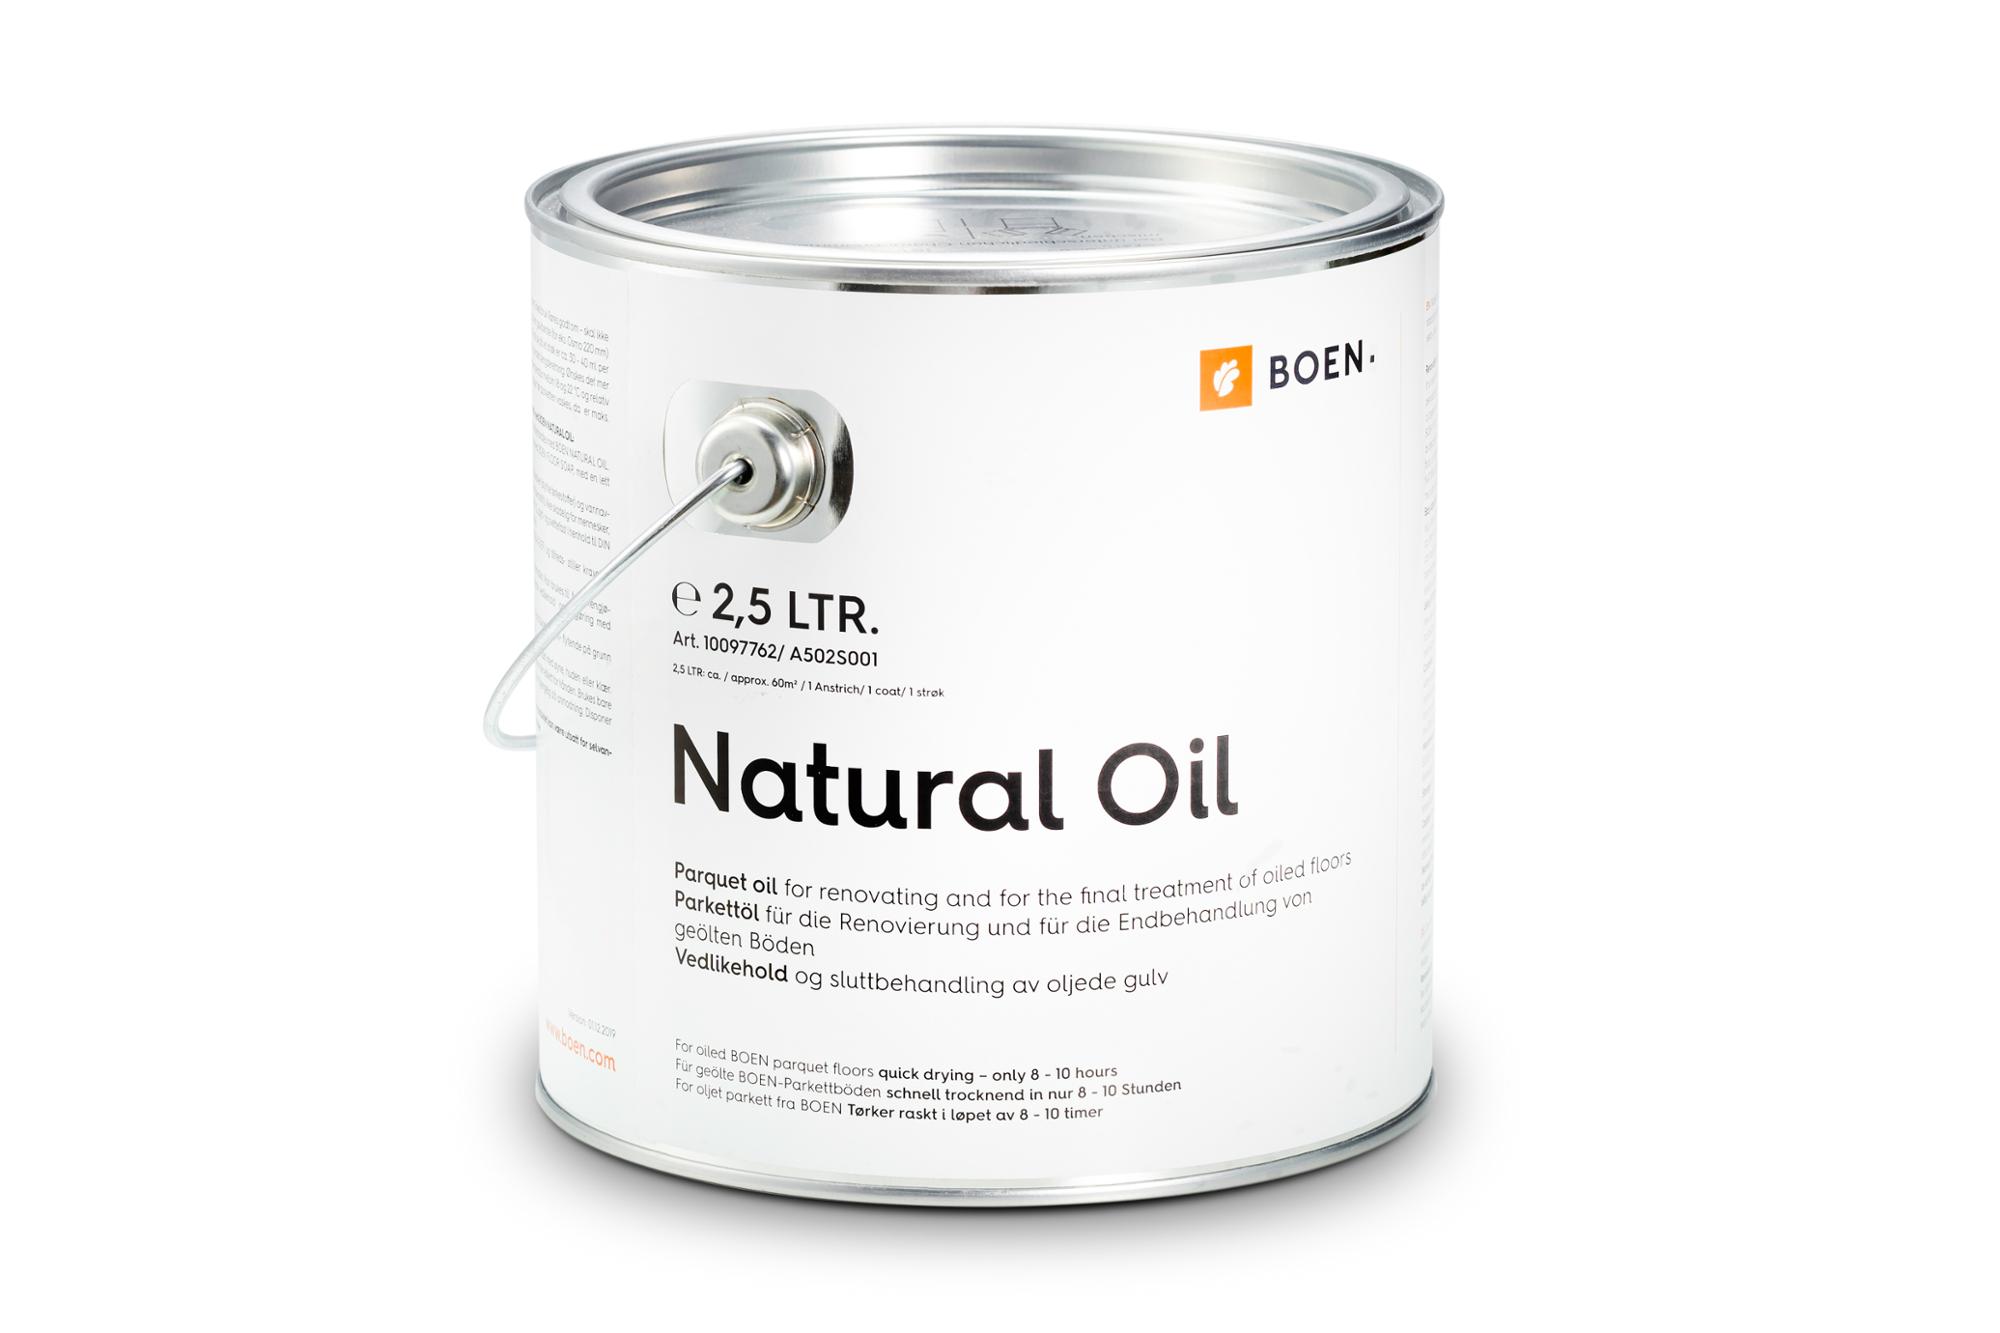 Natural Oil 2,5 Ltr.

For finishing of sanded
or untreated wooden surfaces.
1 litre for approx. 24m²